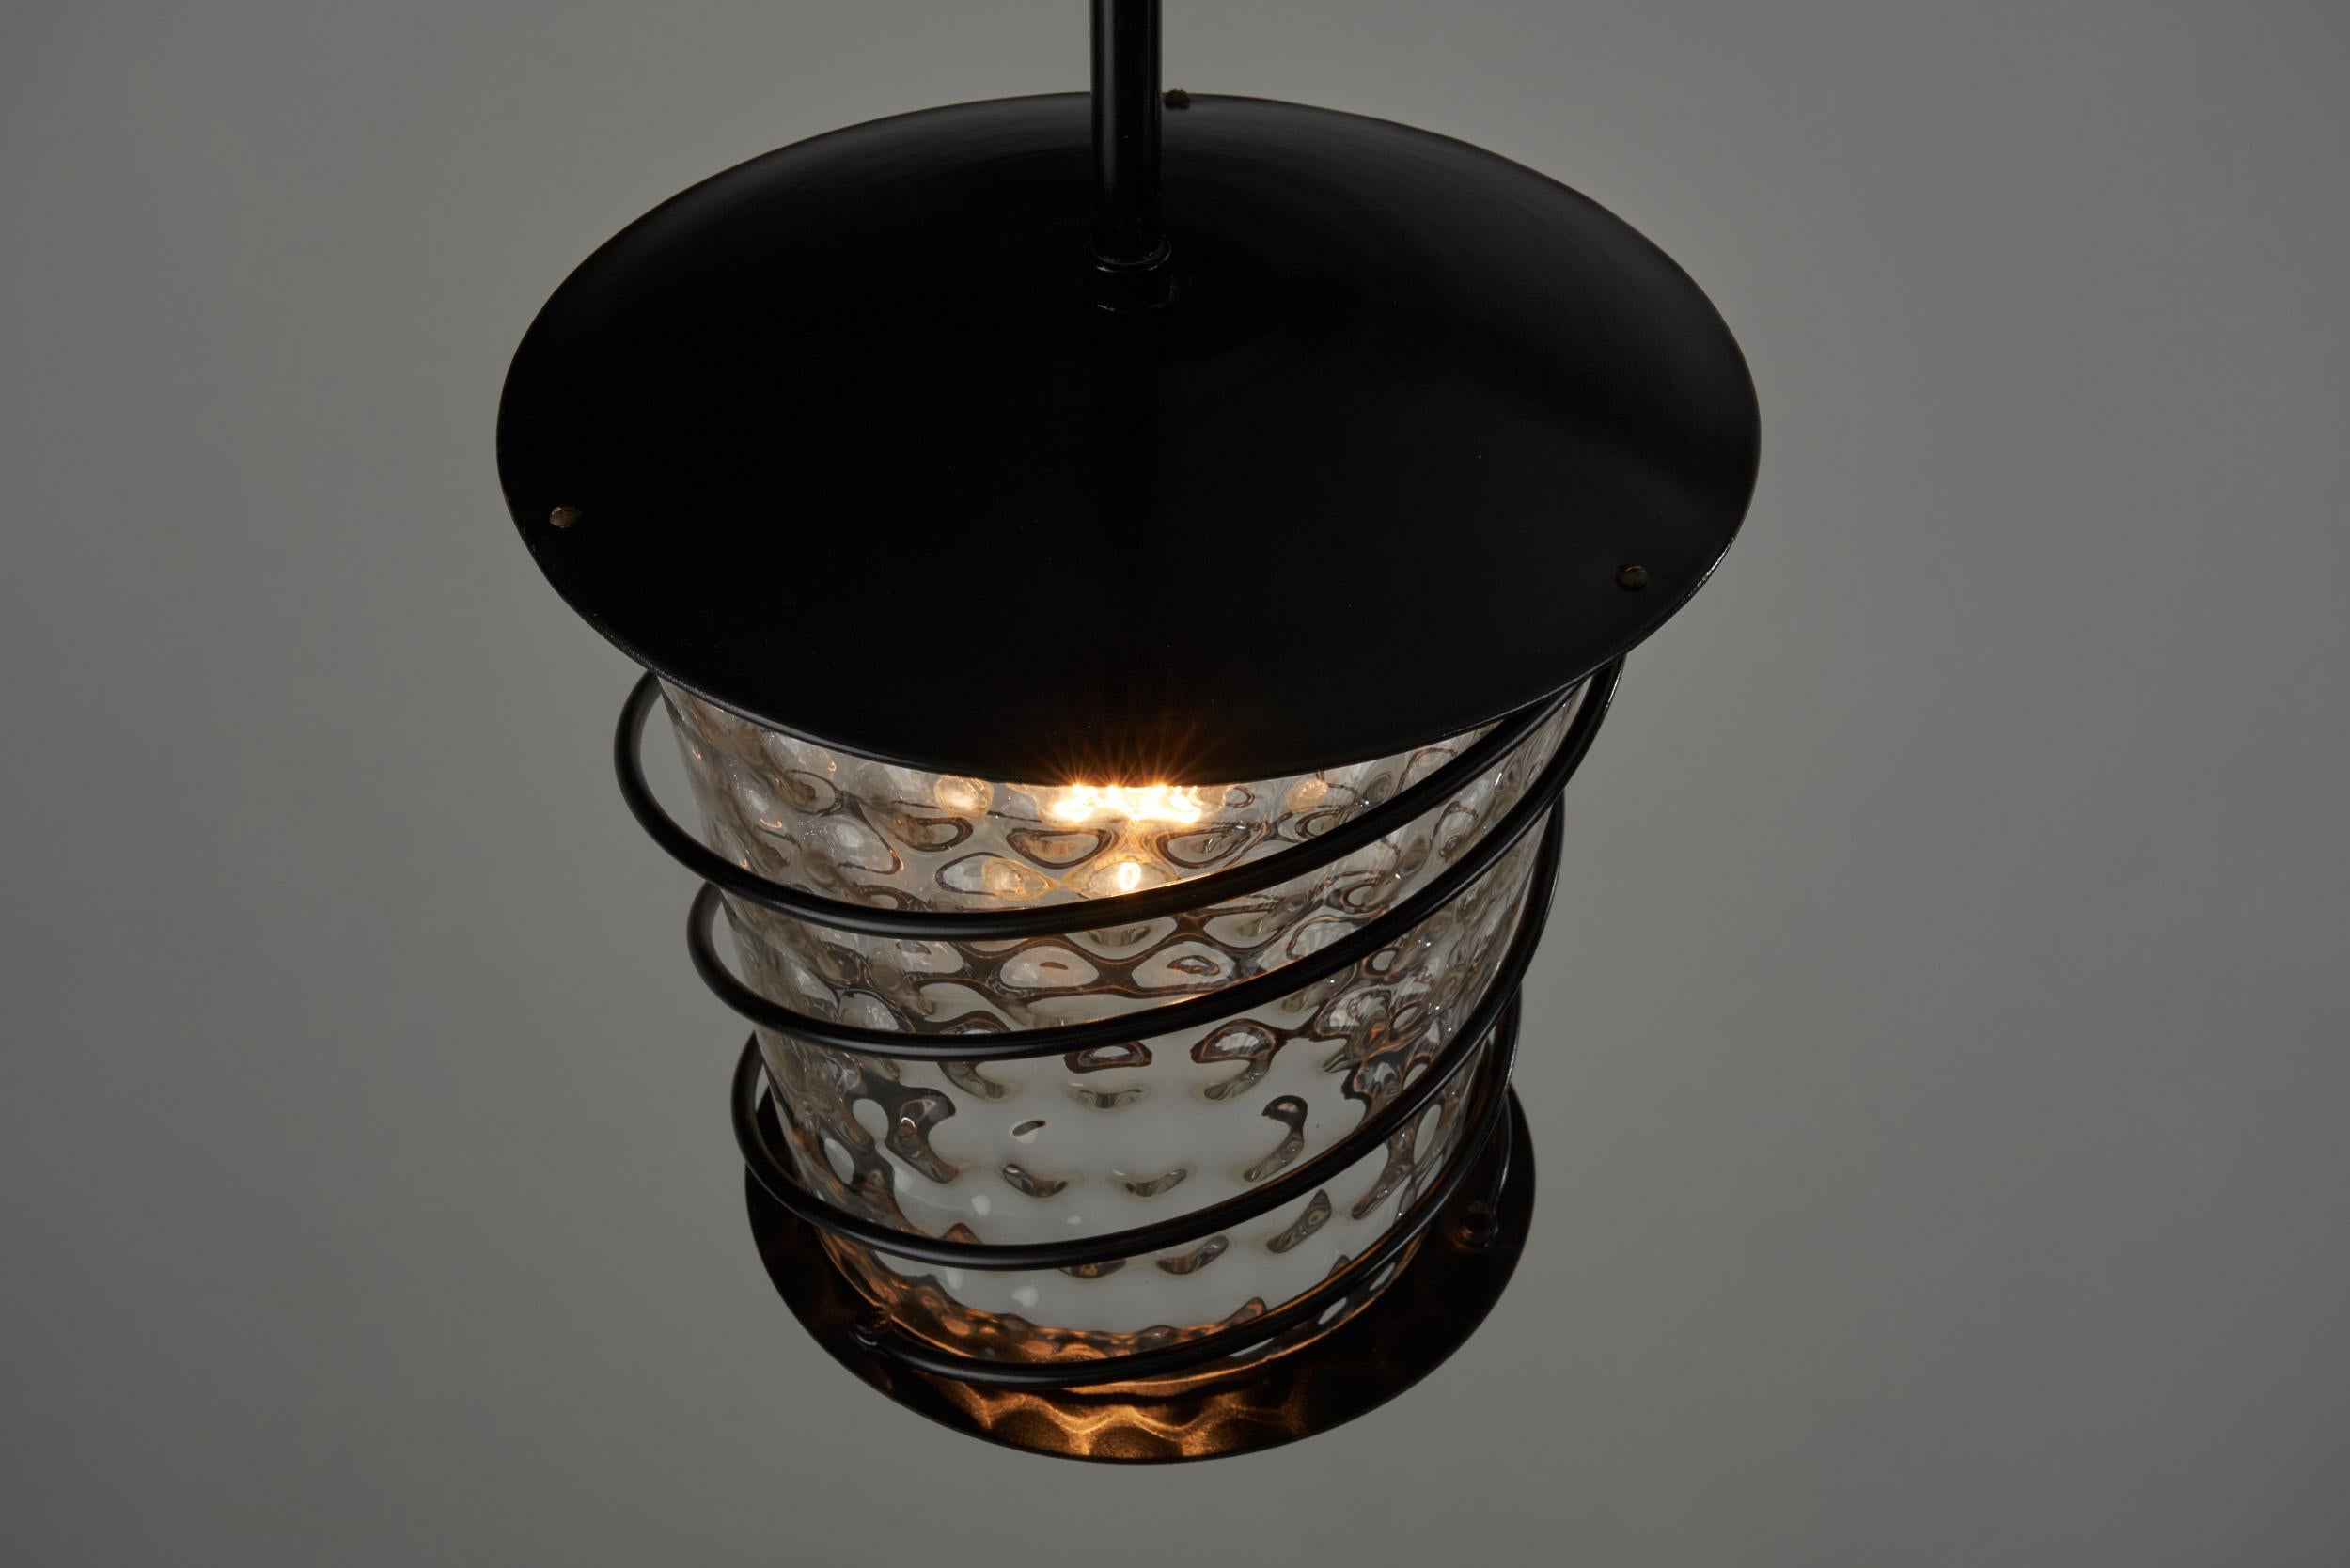 Scandinavian Tin and Glass Accent Ceiling Lamp, Scandinavia, 1920s For Sale 2